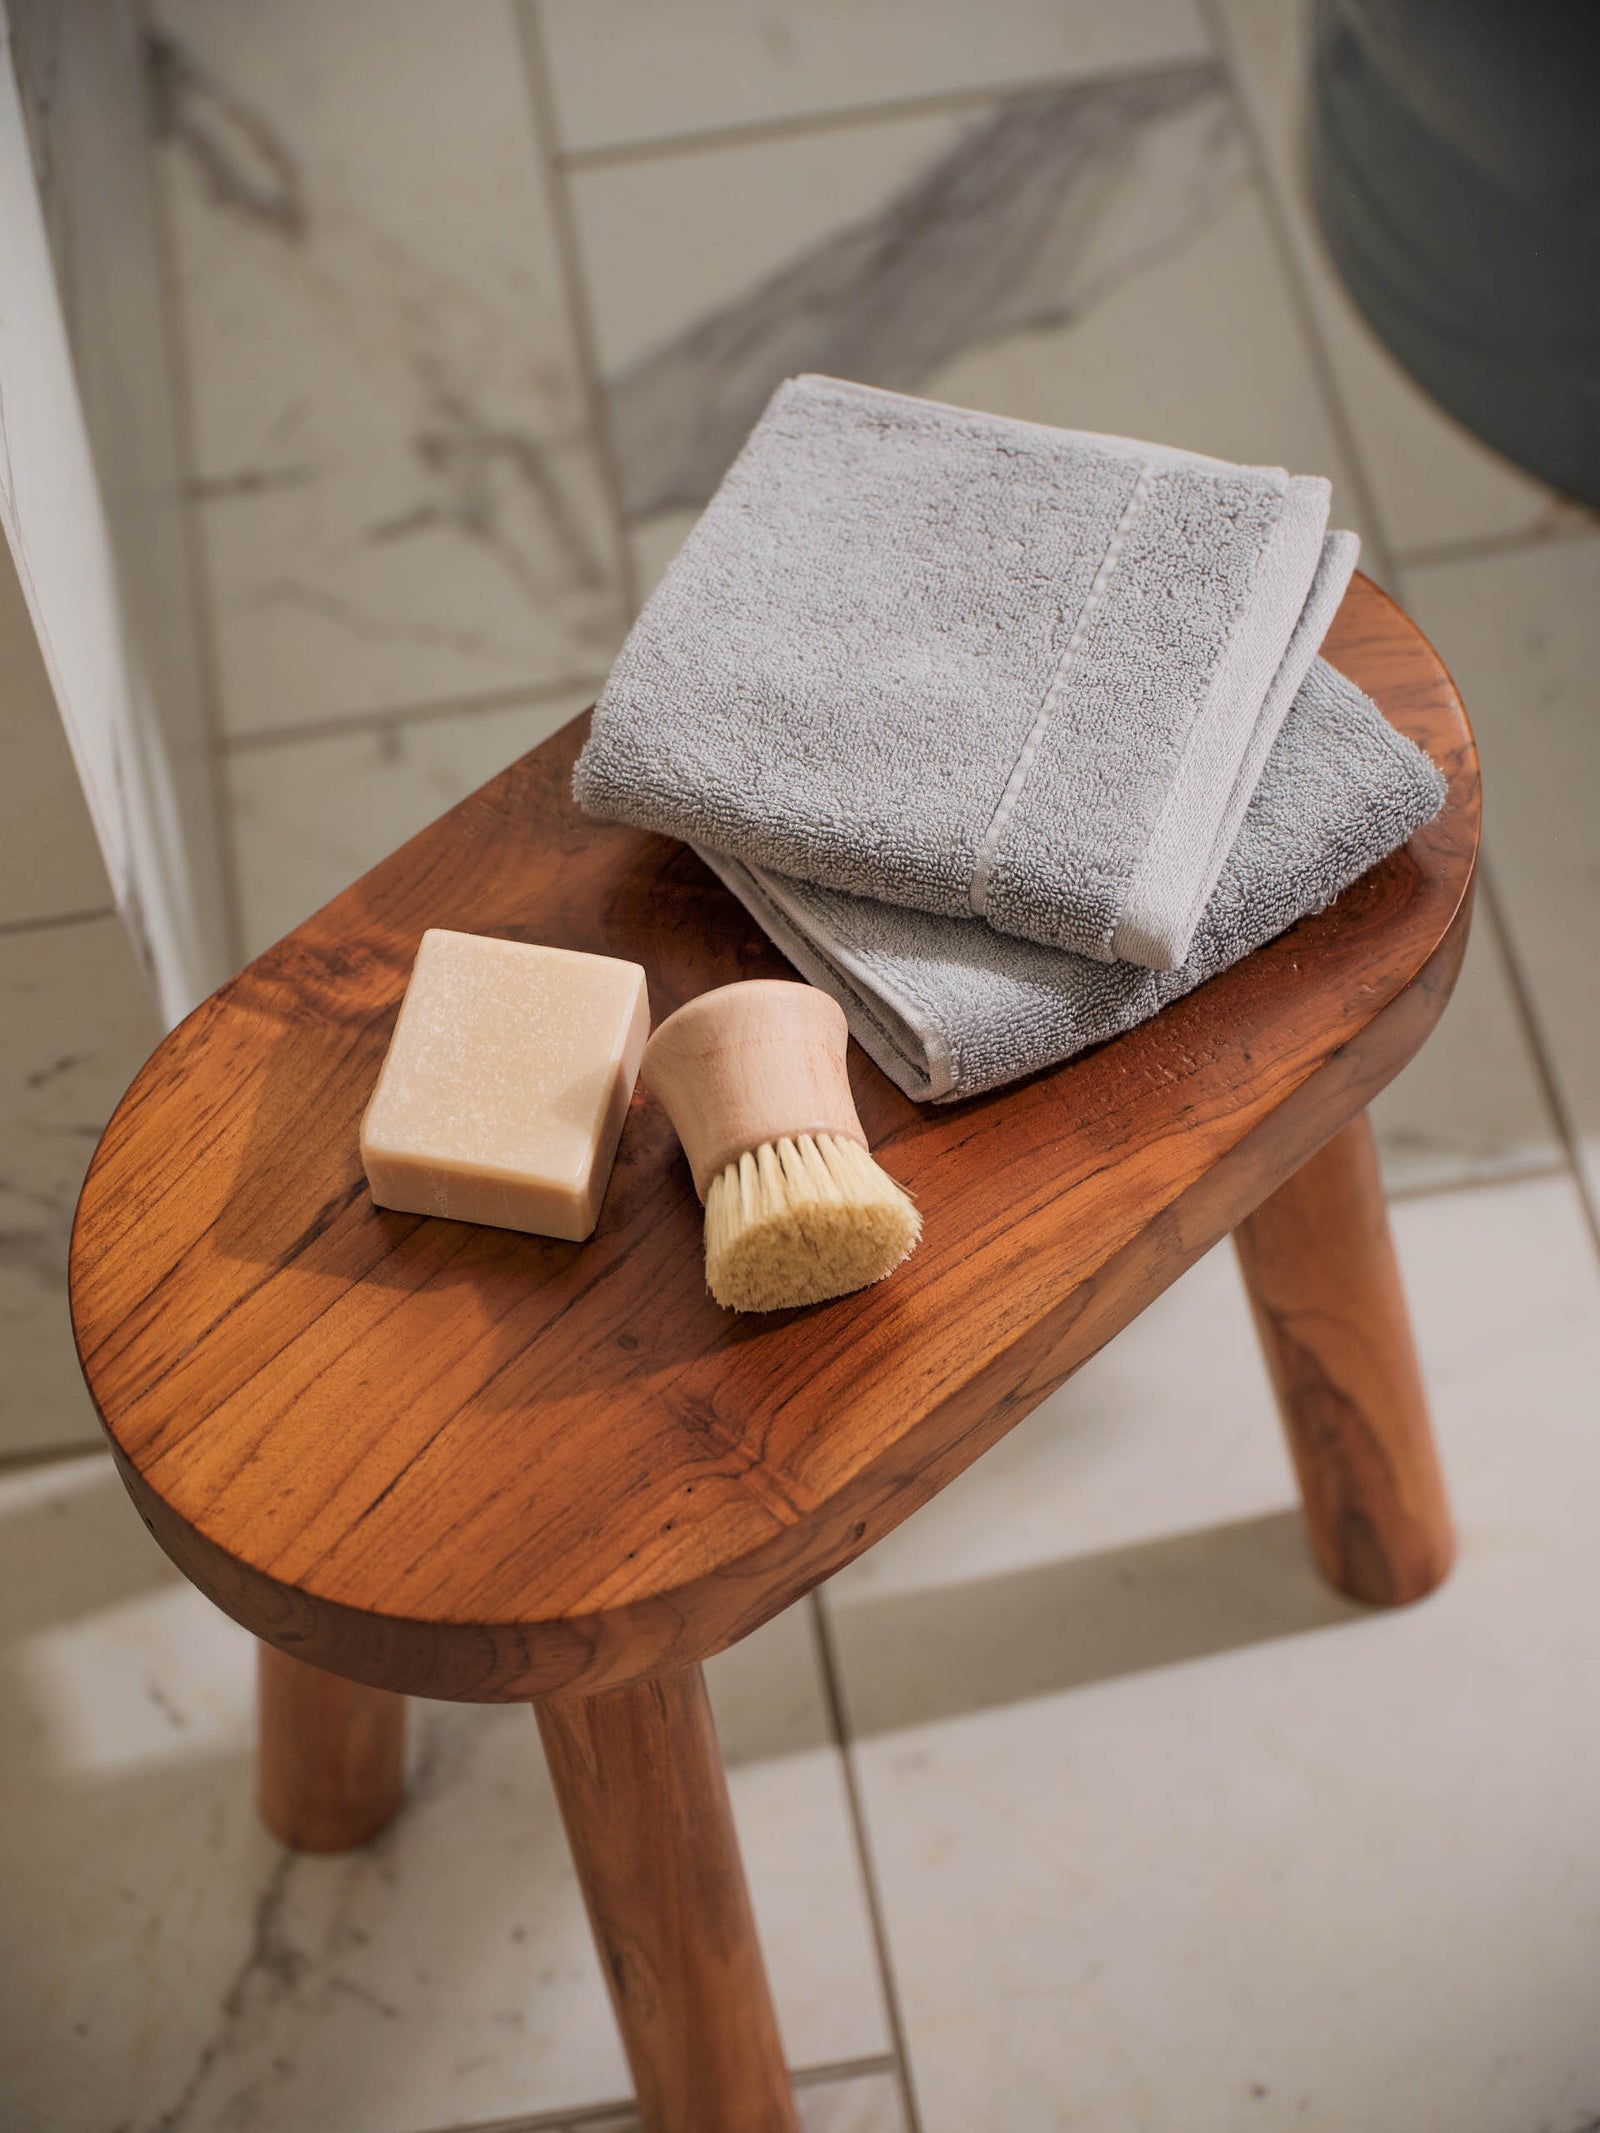 Premium Plush Hand Towels in the color Harbor Mist. Photo of Harbor Mist Premium Plush Hand Towels taken resting on a stool in a bathroom with marble tile.